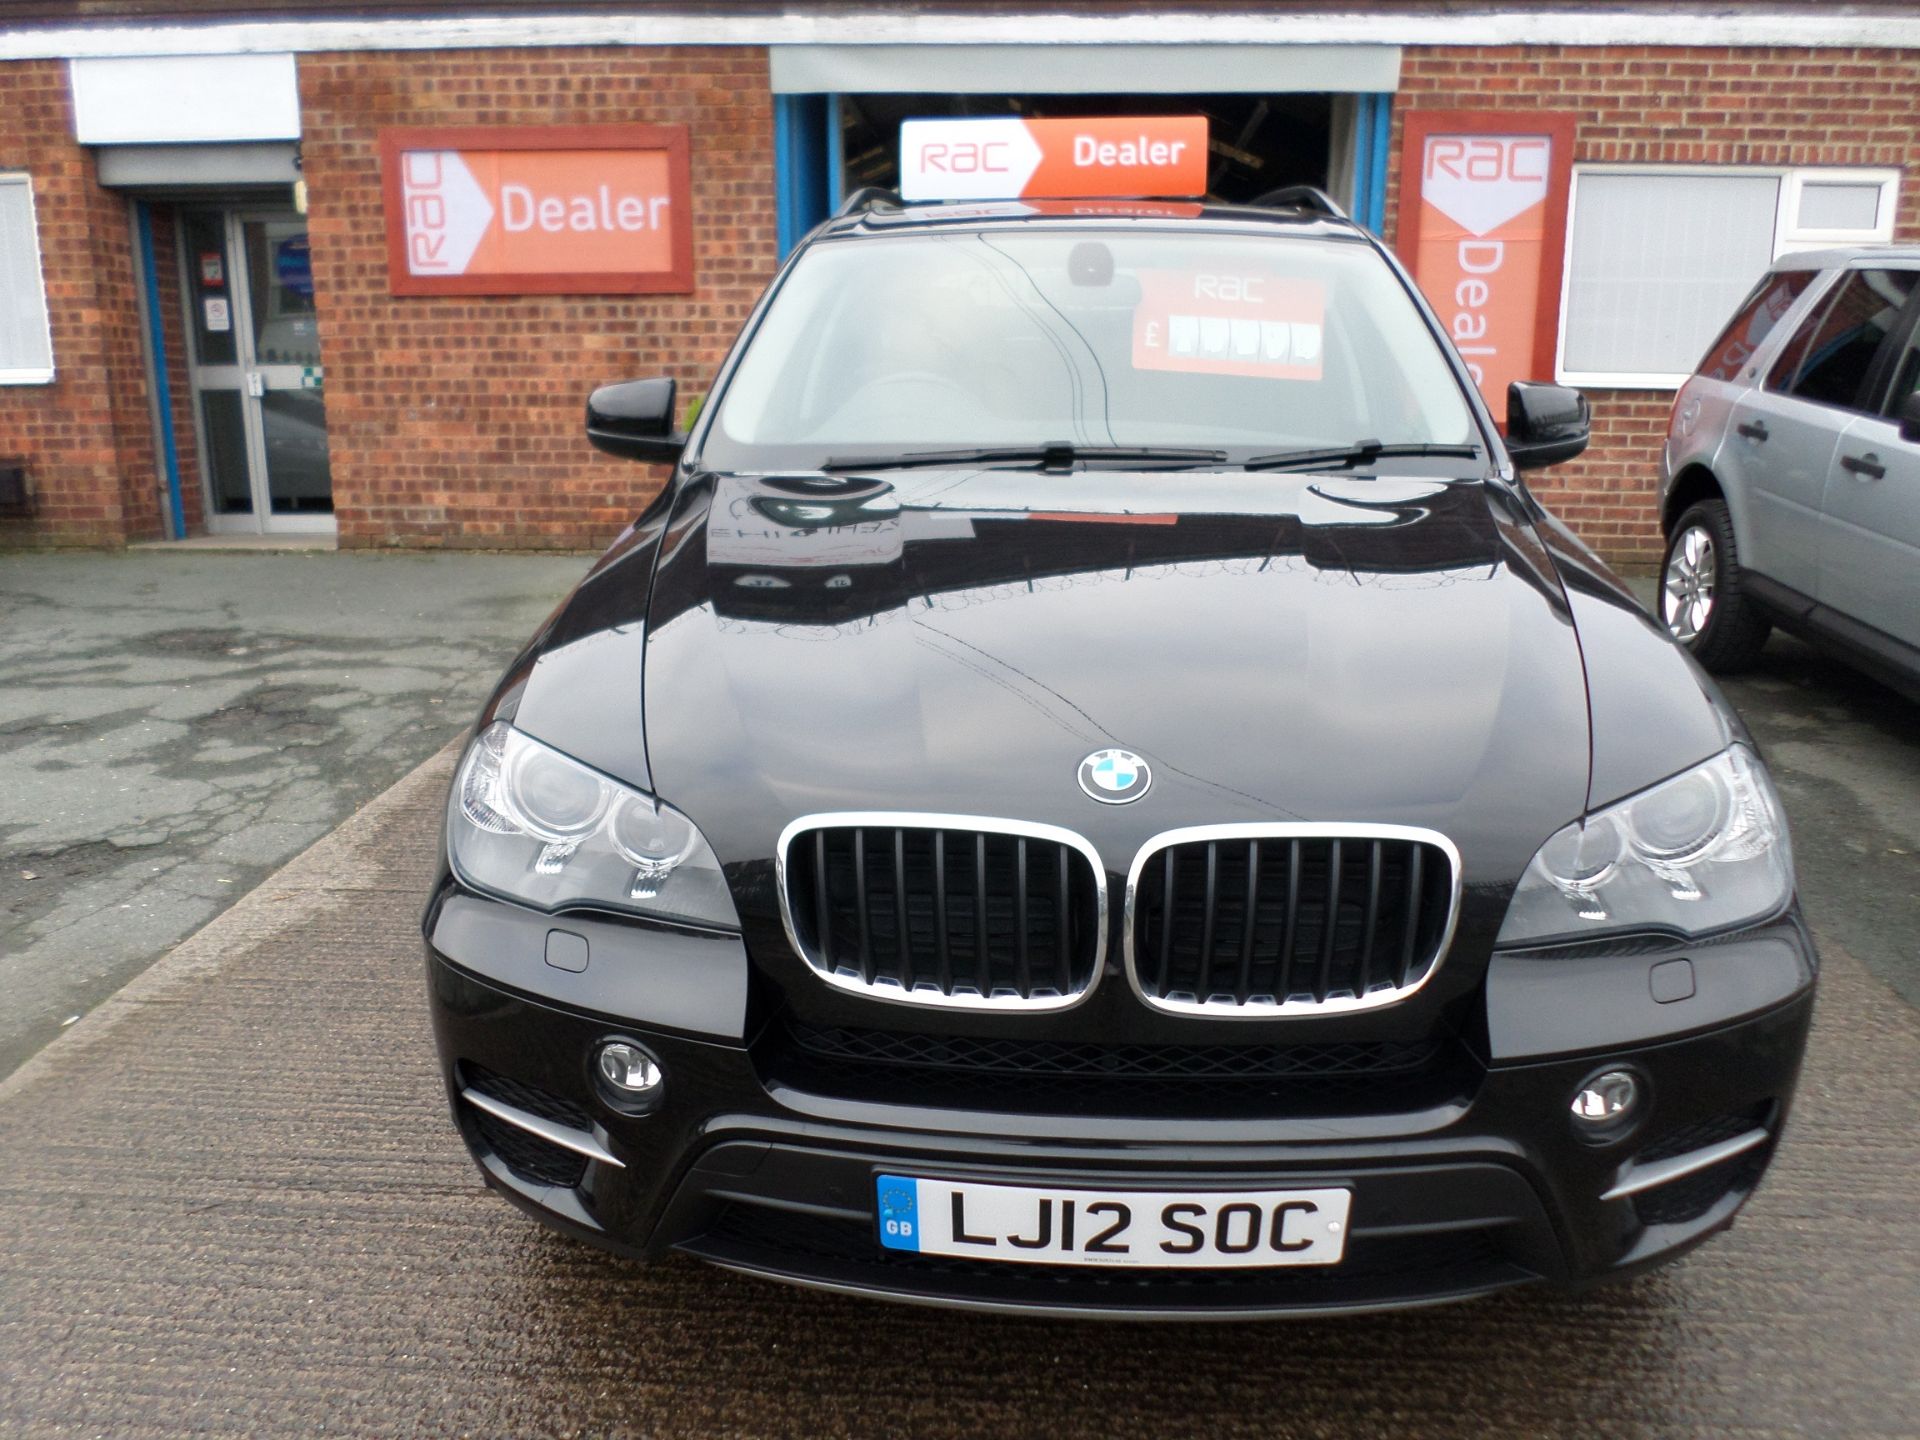 2012/12 REG BMW X5 XDRIVE 30D SE AUTOMATIC - ONLY 22K MILES, SHOWING 1 FORMER KEEPER *NO VAT* - Image 2 of 11